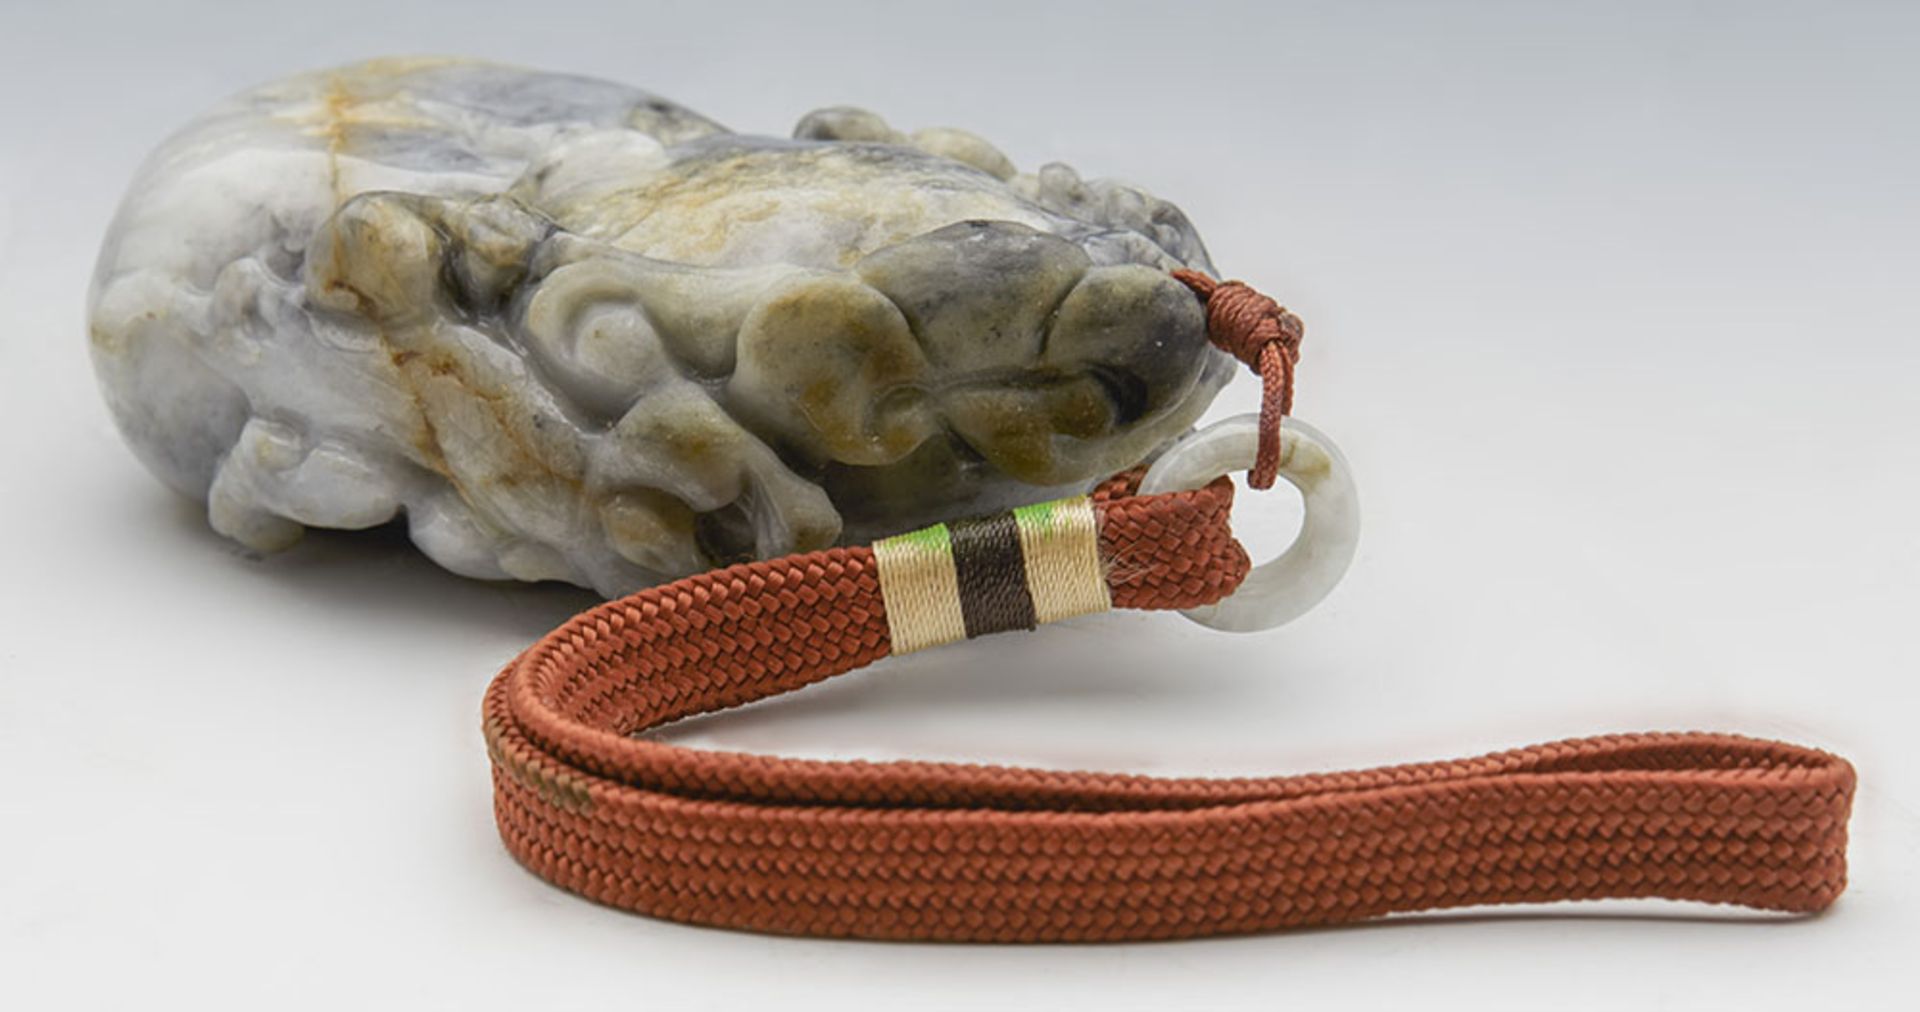 Vintage Chinese Corded Hardstone Boulder With Kylin 20Th C. - Image 8 of 10